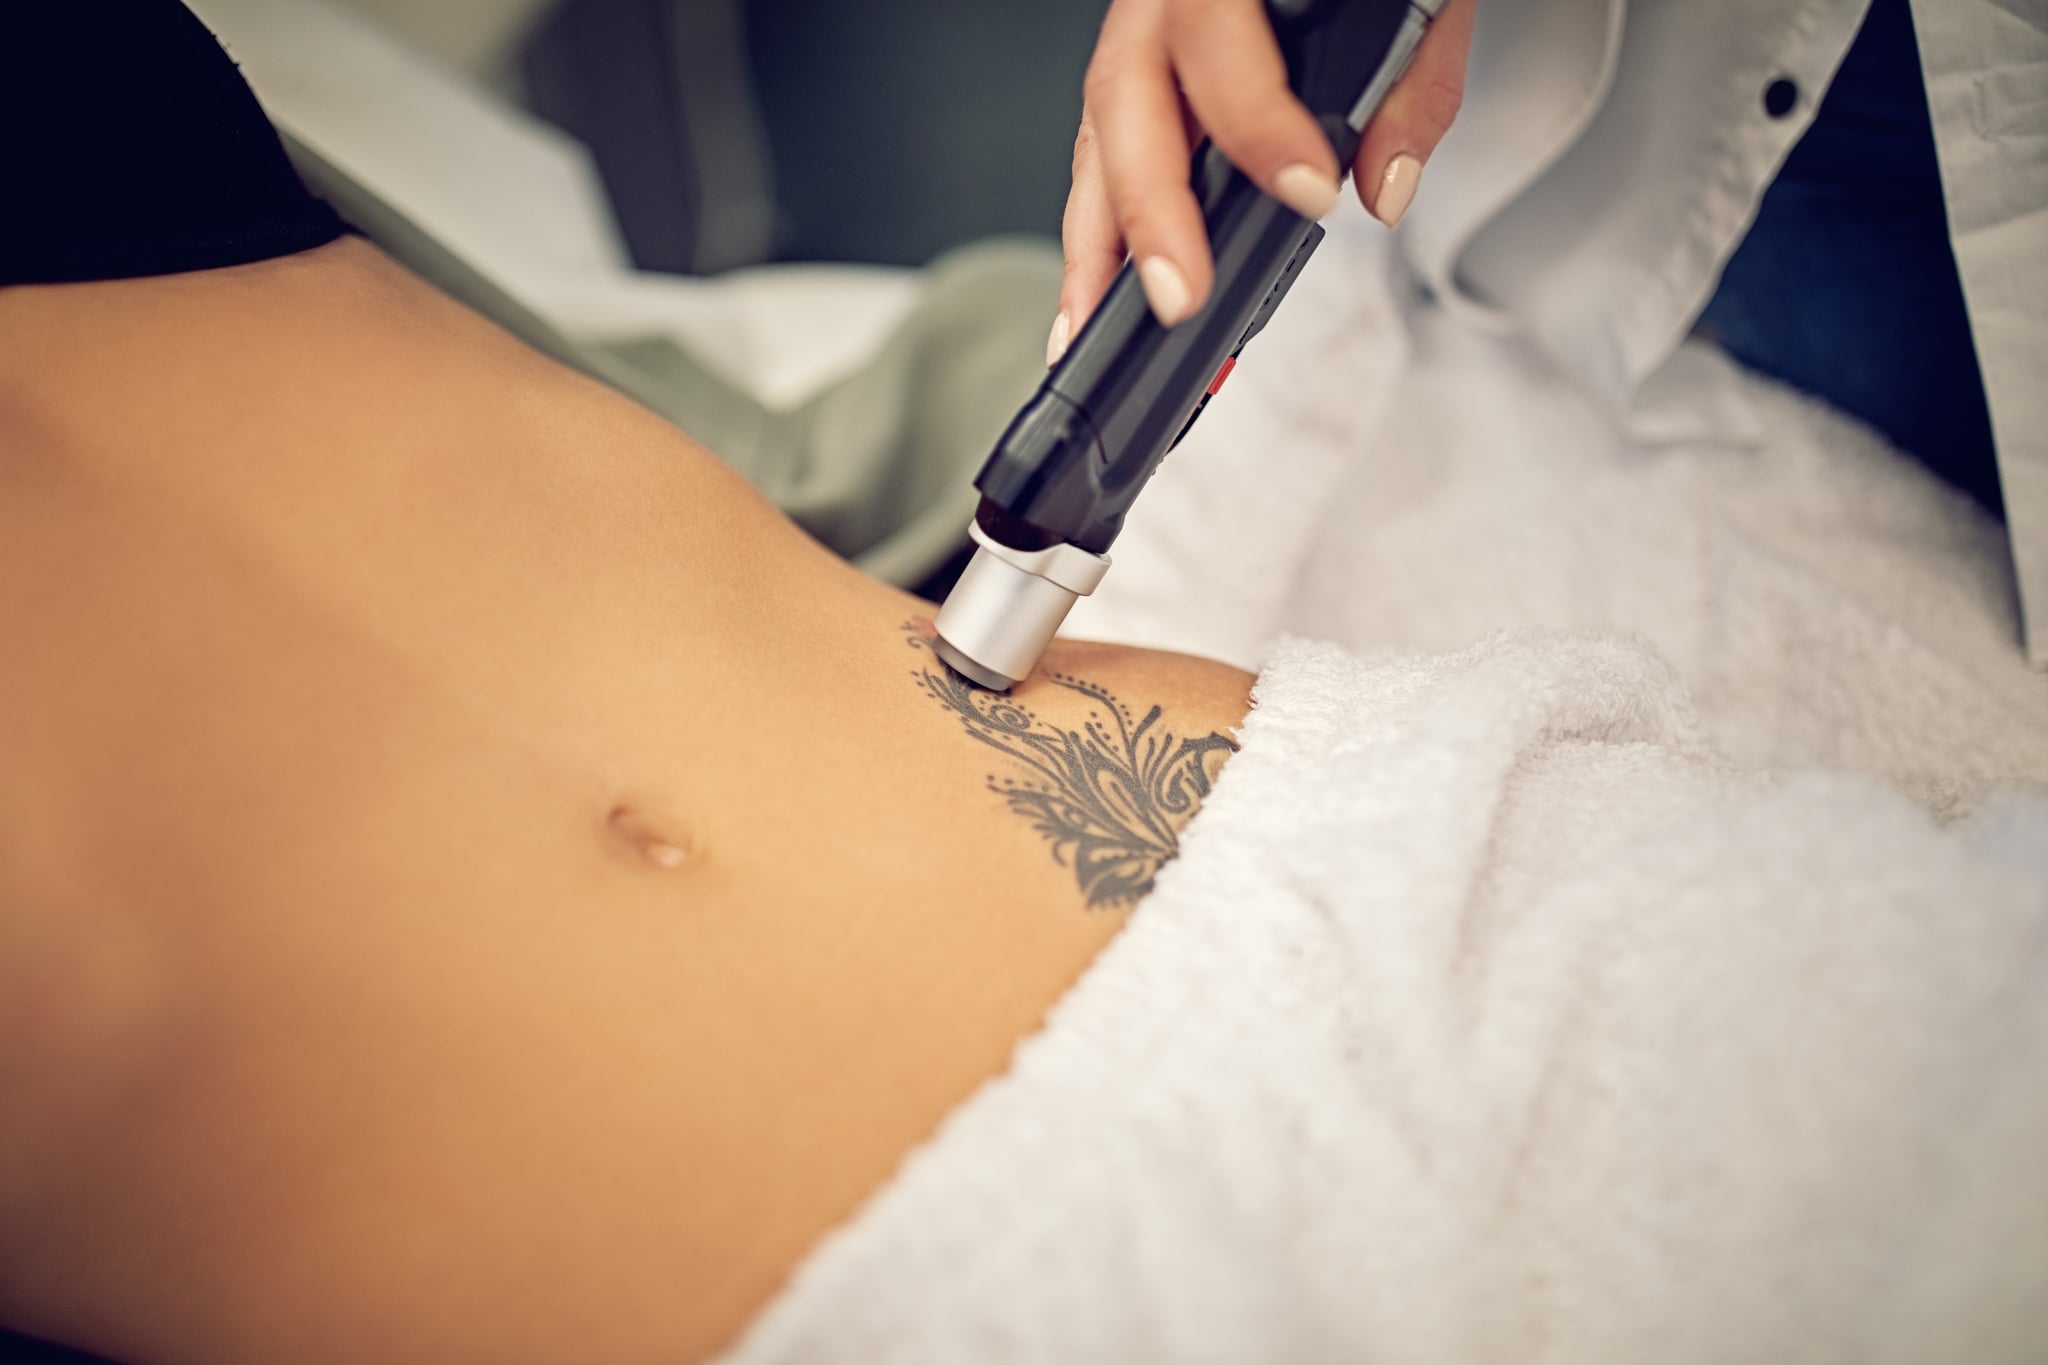 Topical Tattoo Removal Creams: Do They Really Work?